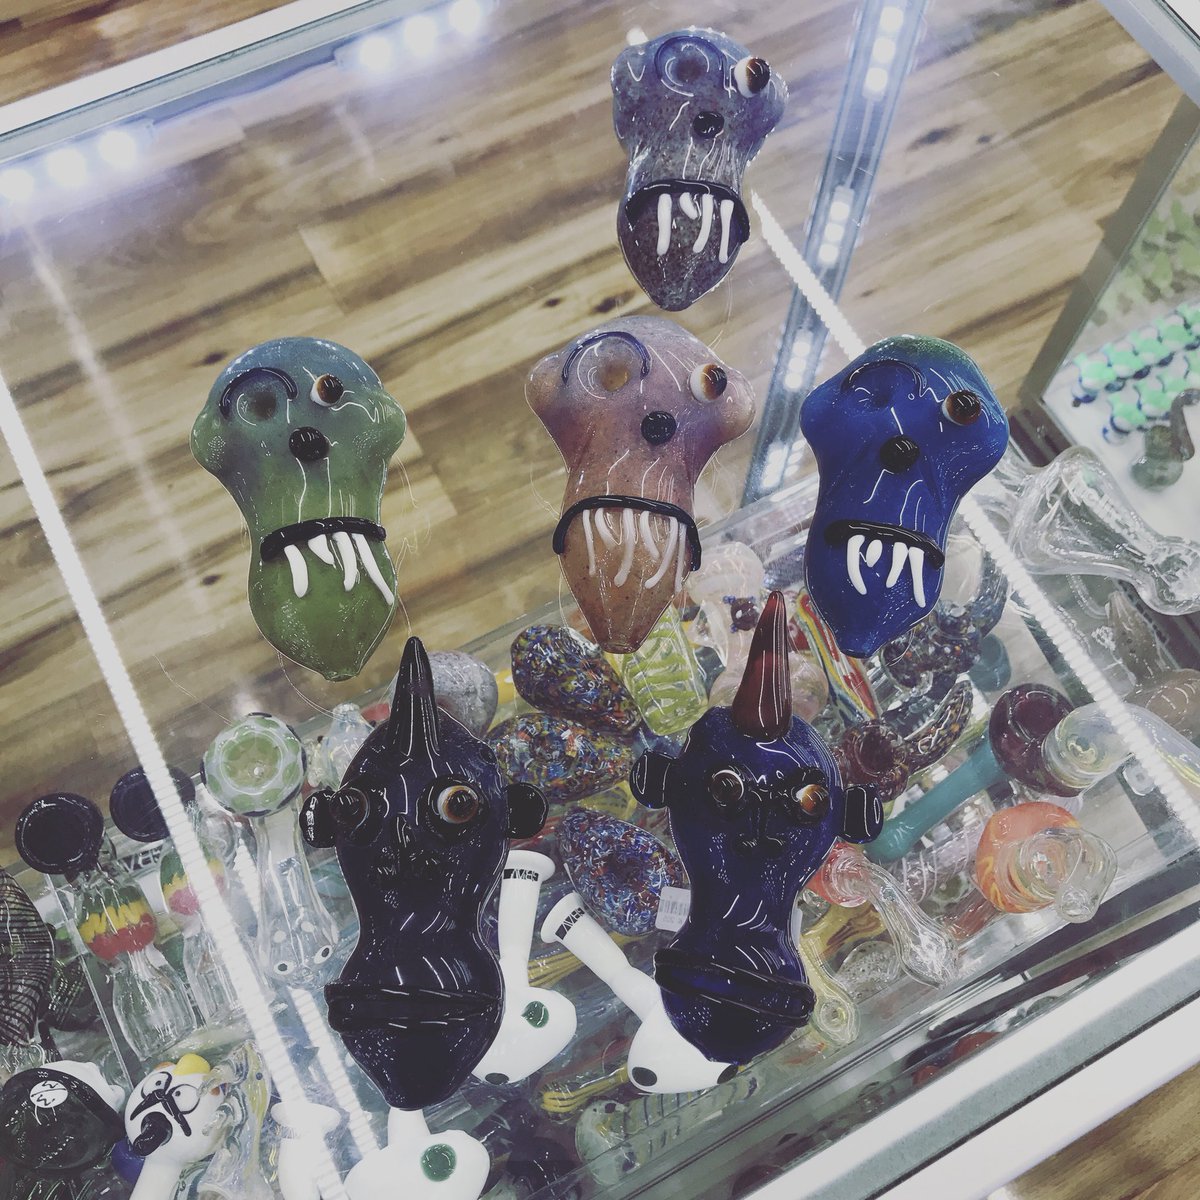 Custom skull pieces are in come get your own while they last #spooky #calle8 #calle8miami #worldofsmokenvapecalle8 #smokingaccessories #wecarryall #bestsmokingselection #bubblers #bestsmokingbrands #chilling #ilovesmoke #vapensmokeshop #smokeshop #miamismokers #smokewithus